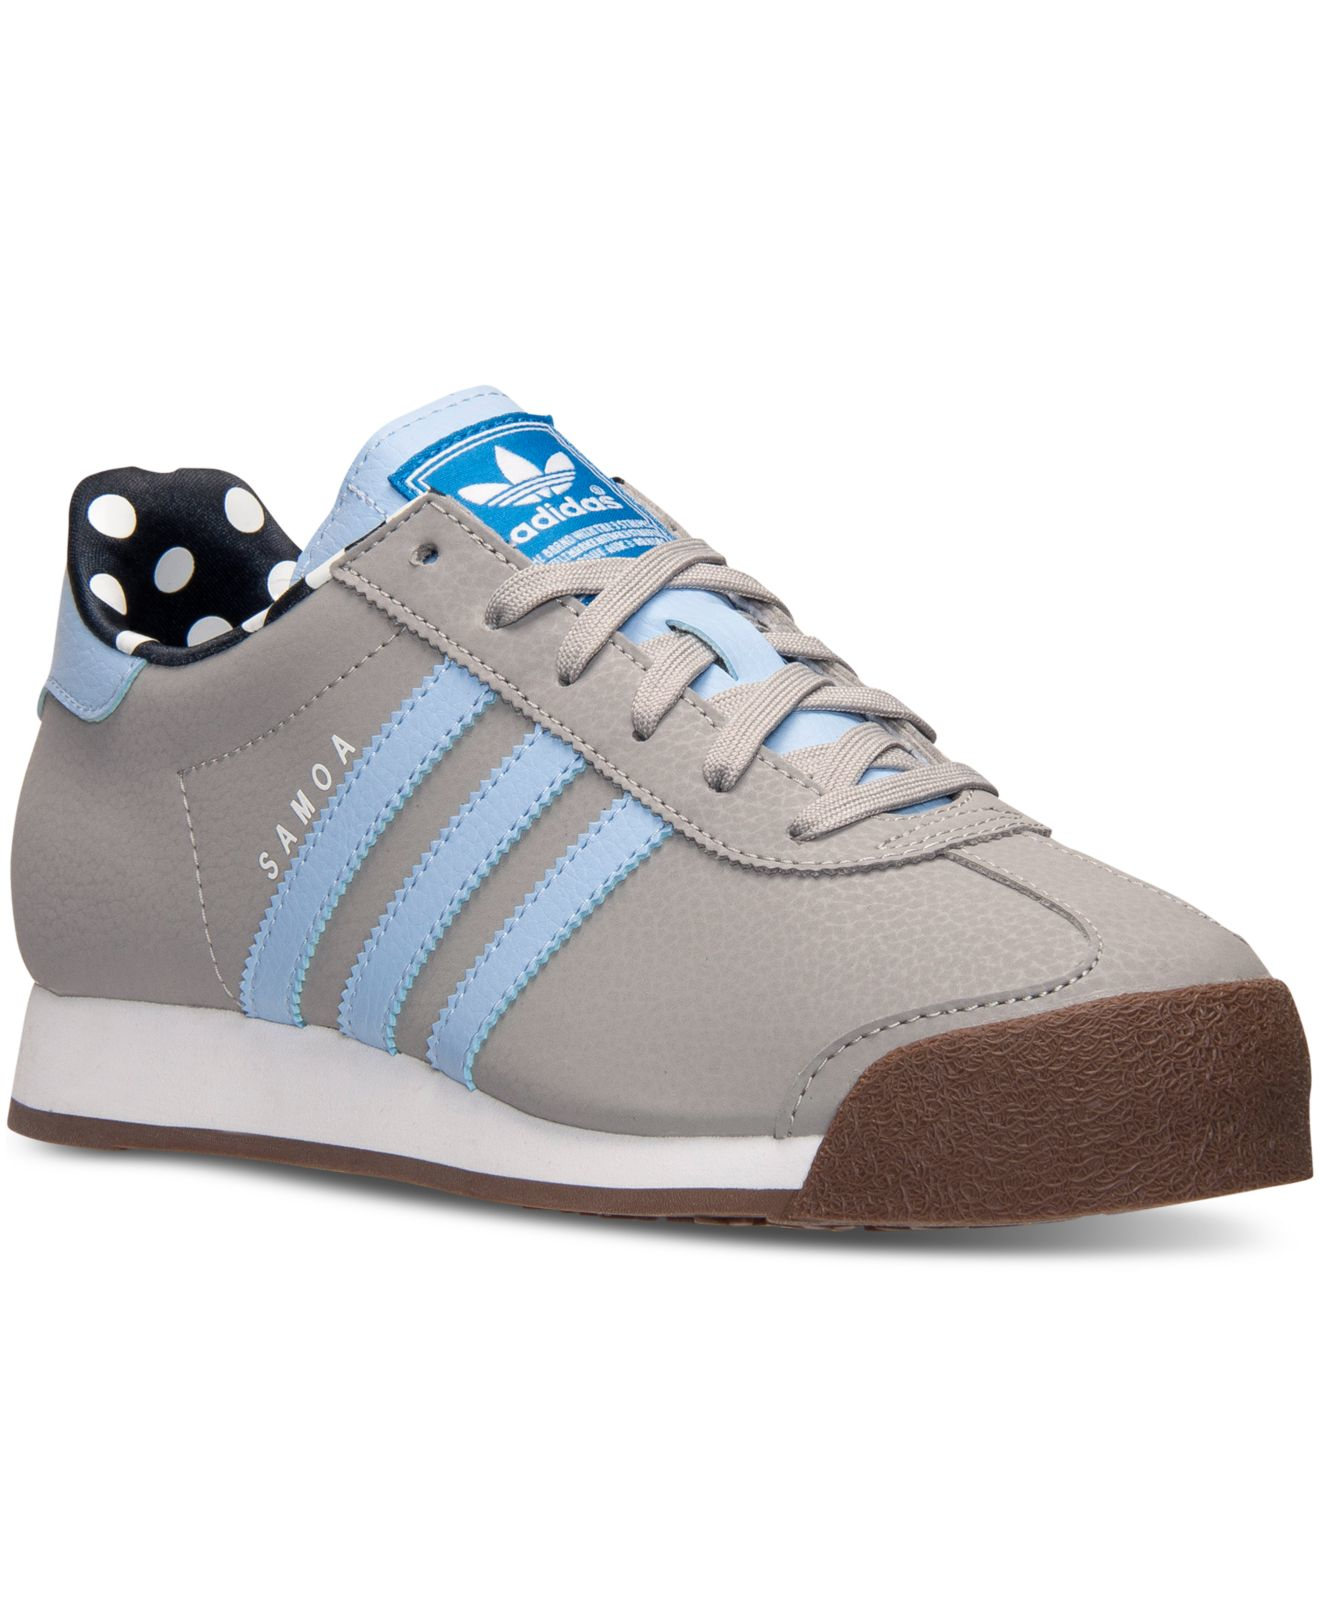 Lyst - Adidas Women's Samoa Casual Sneakers From Finish Line in Gray